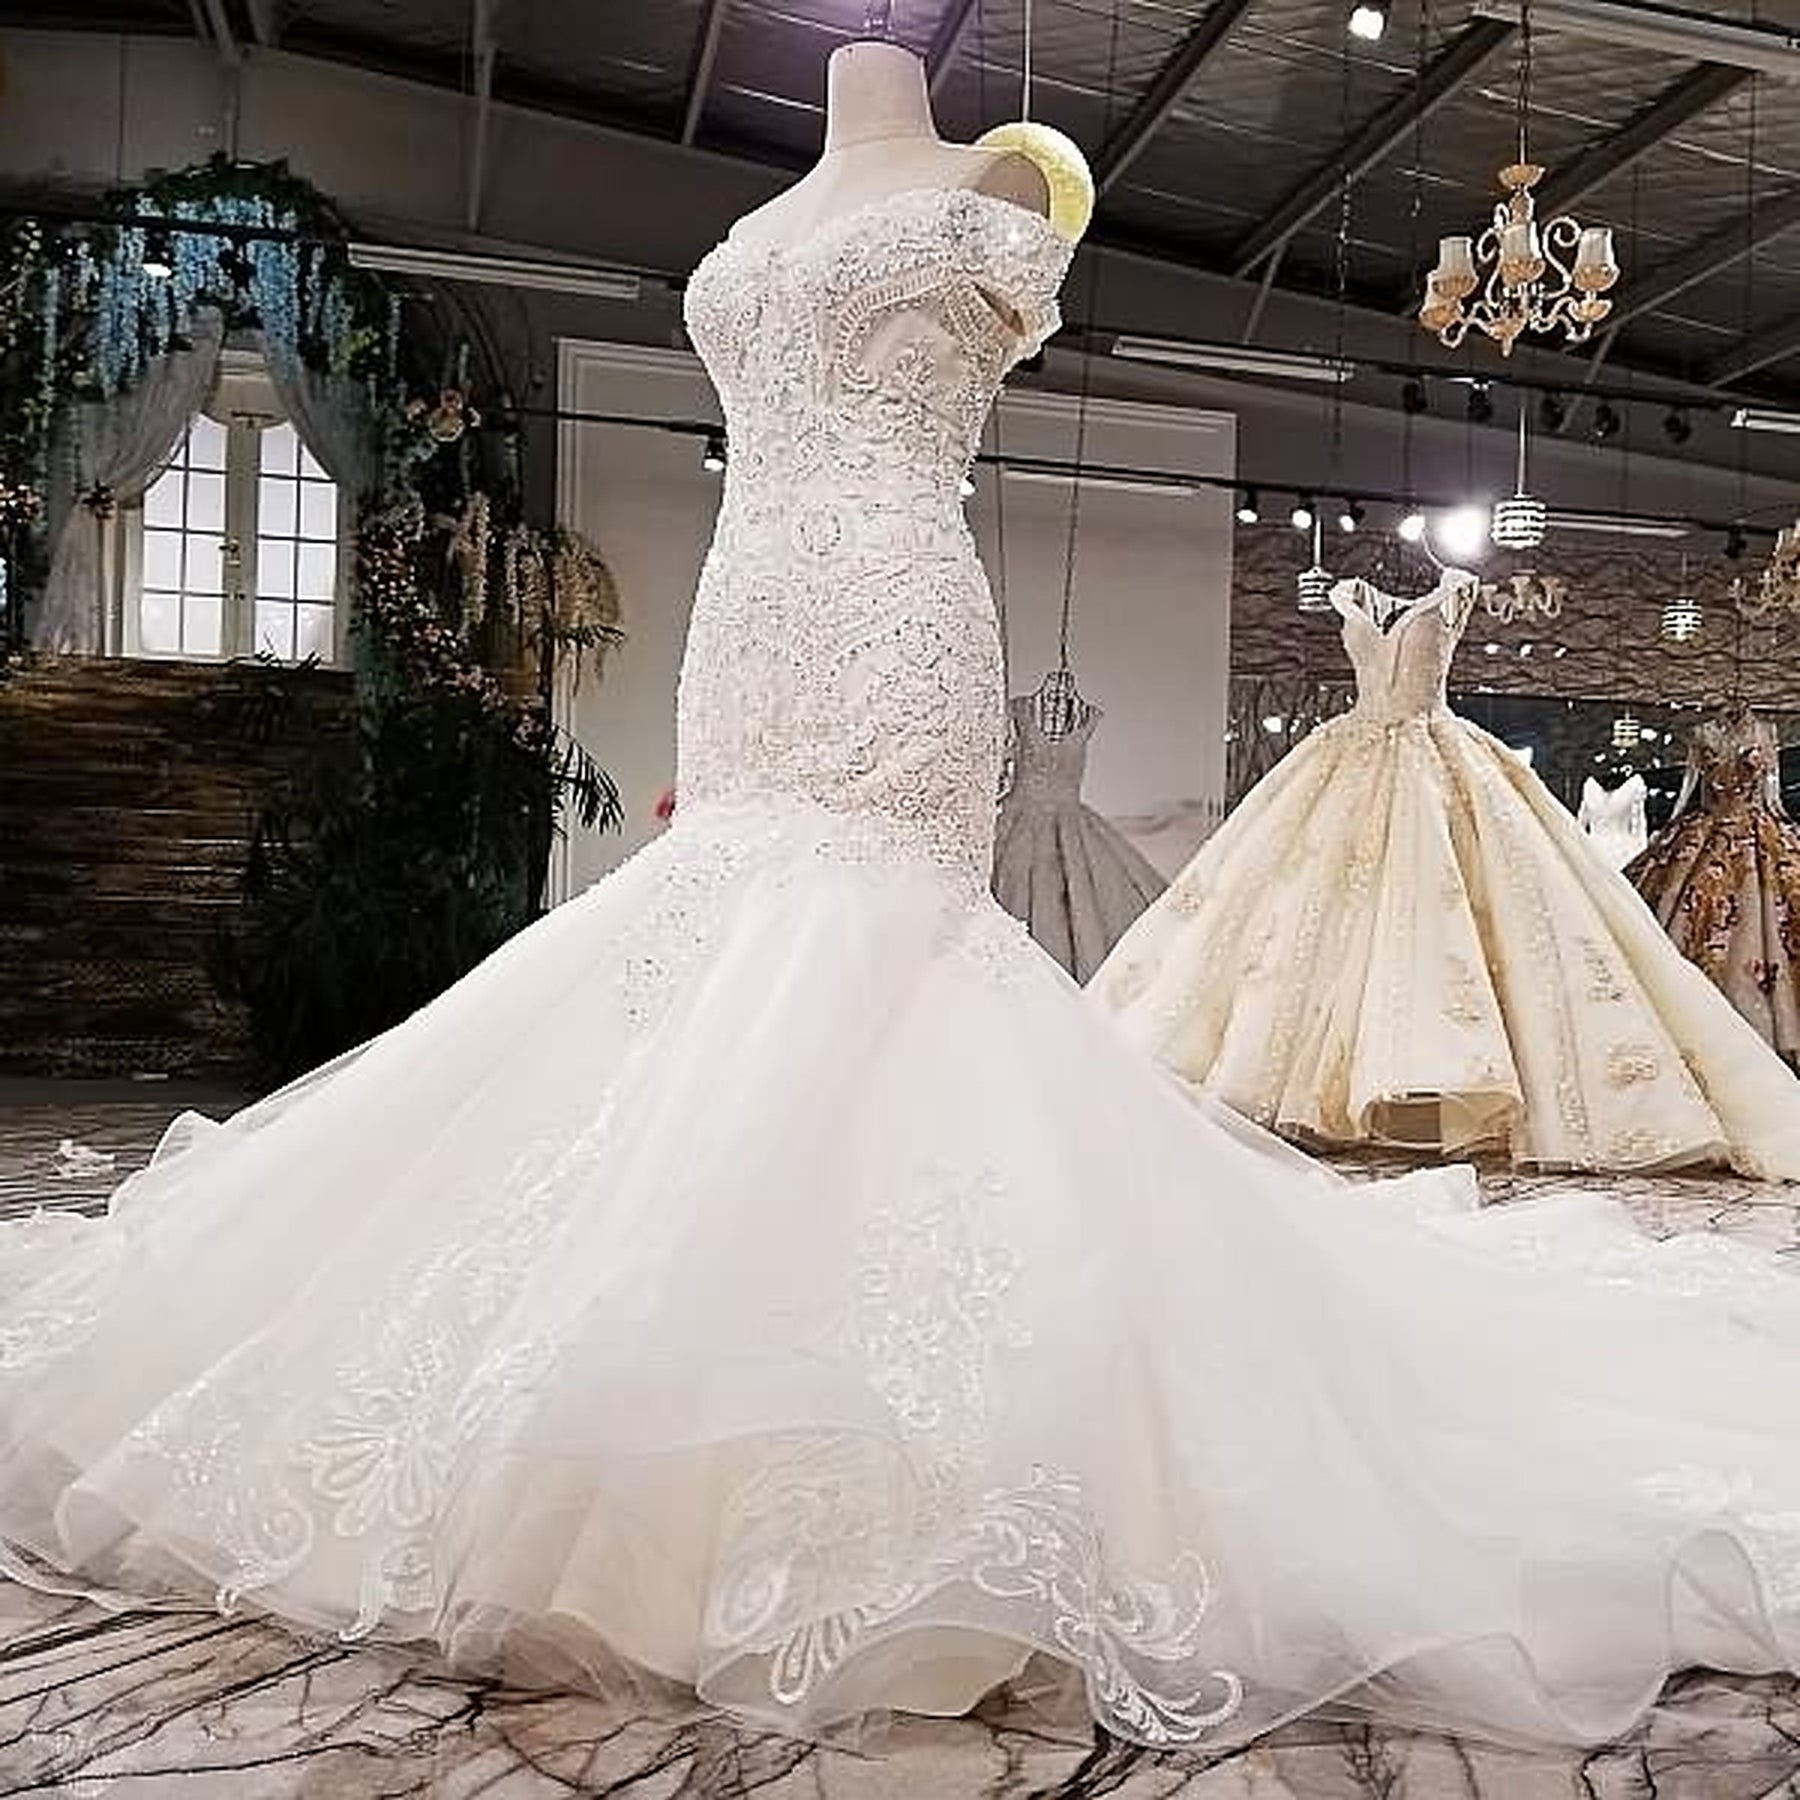 Style CARLOTTA Beaded Mermaid Gown with Sweetheart Neckline and Ruffle  Skirt  Justin Alexander Signature